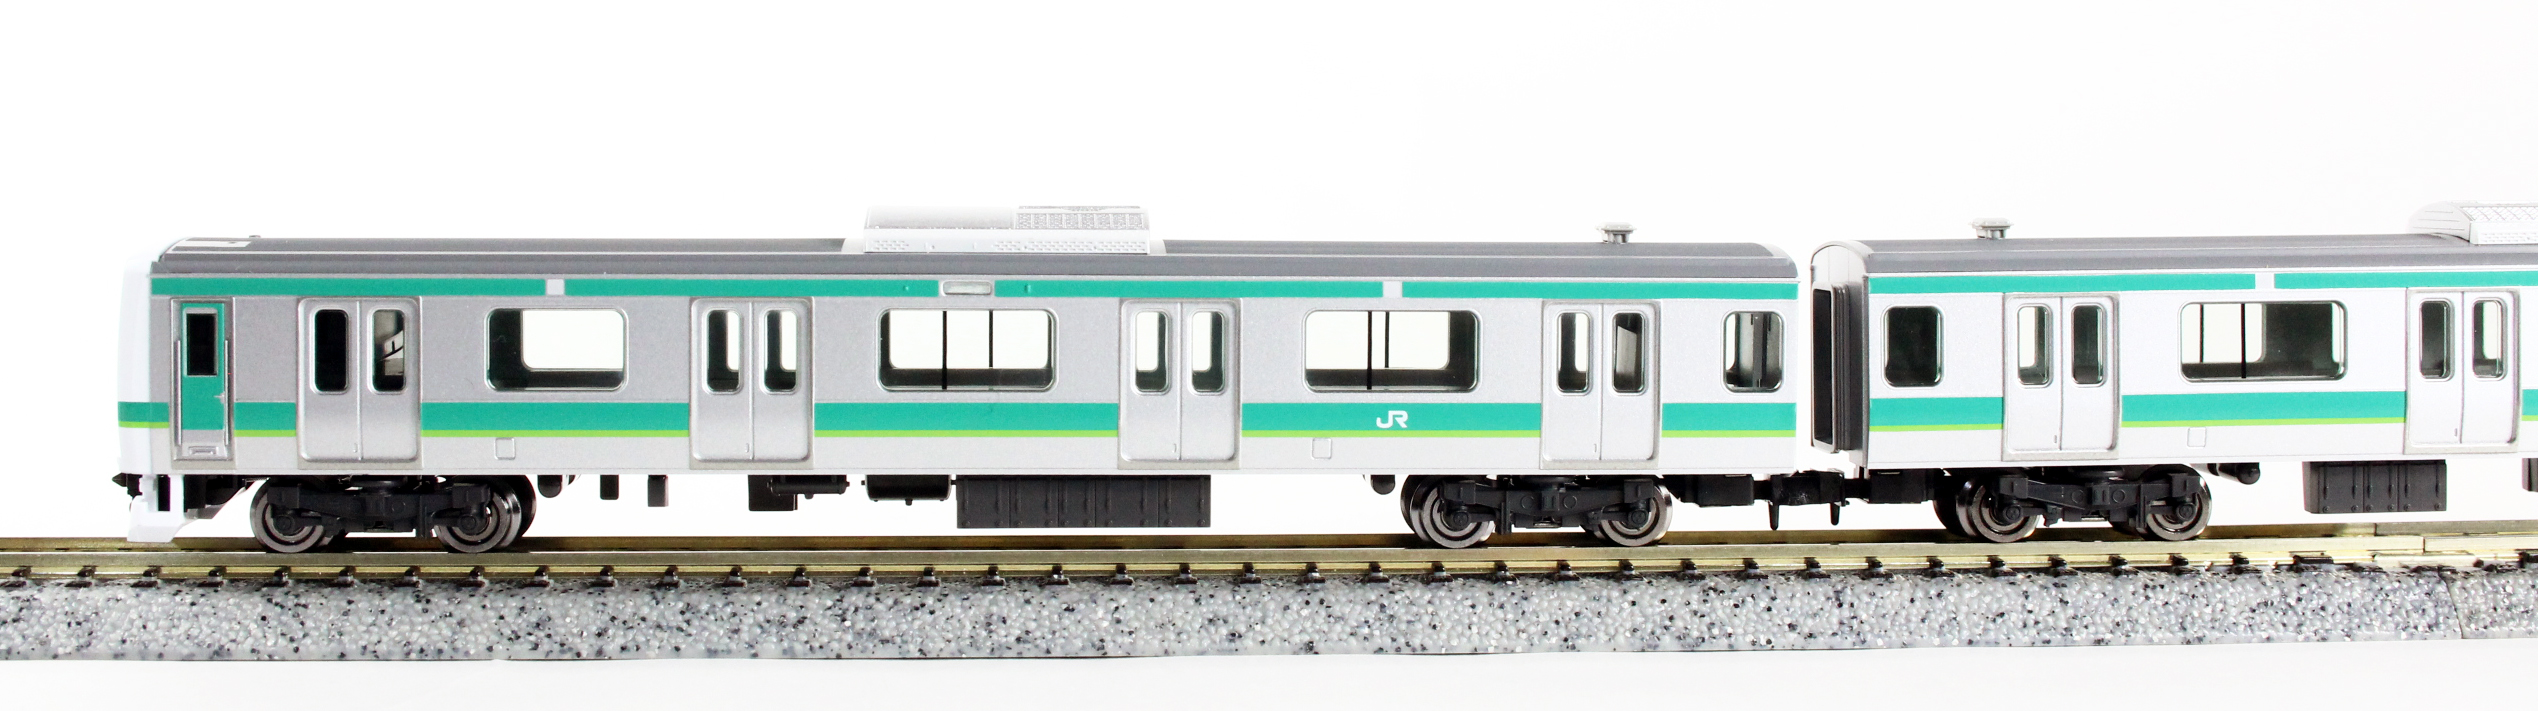 TOMIX 16番(1/80,HO) E231系 常磐線 5両セット 室内灯付